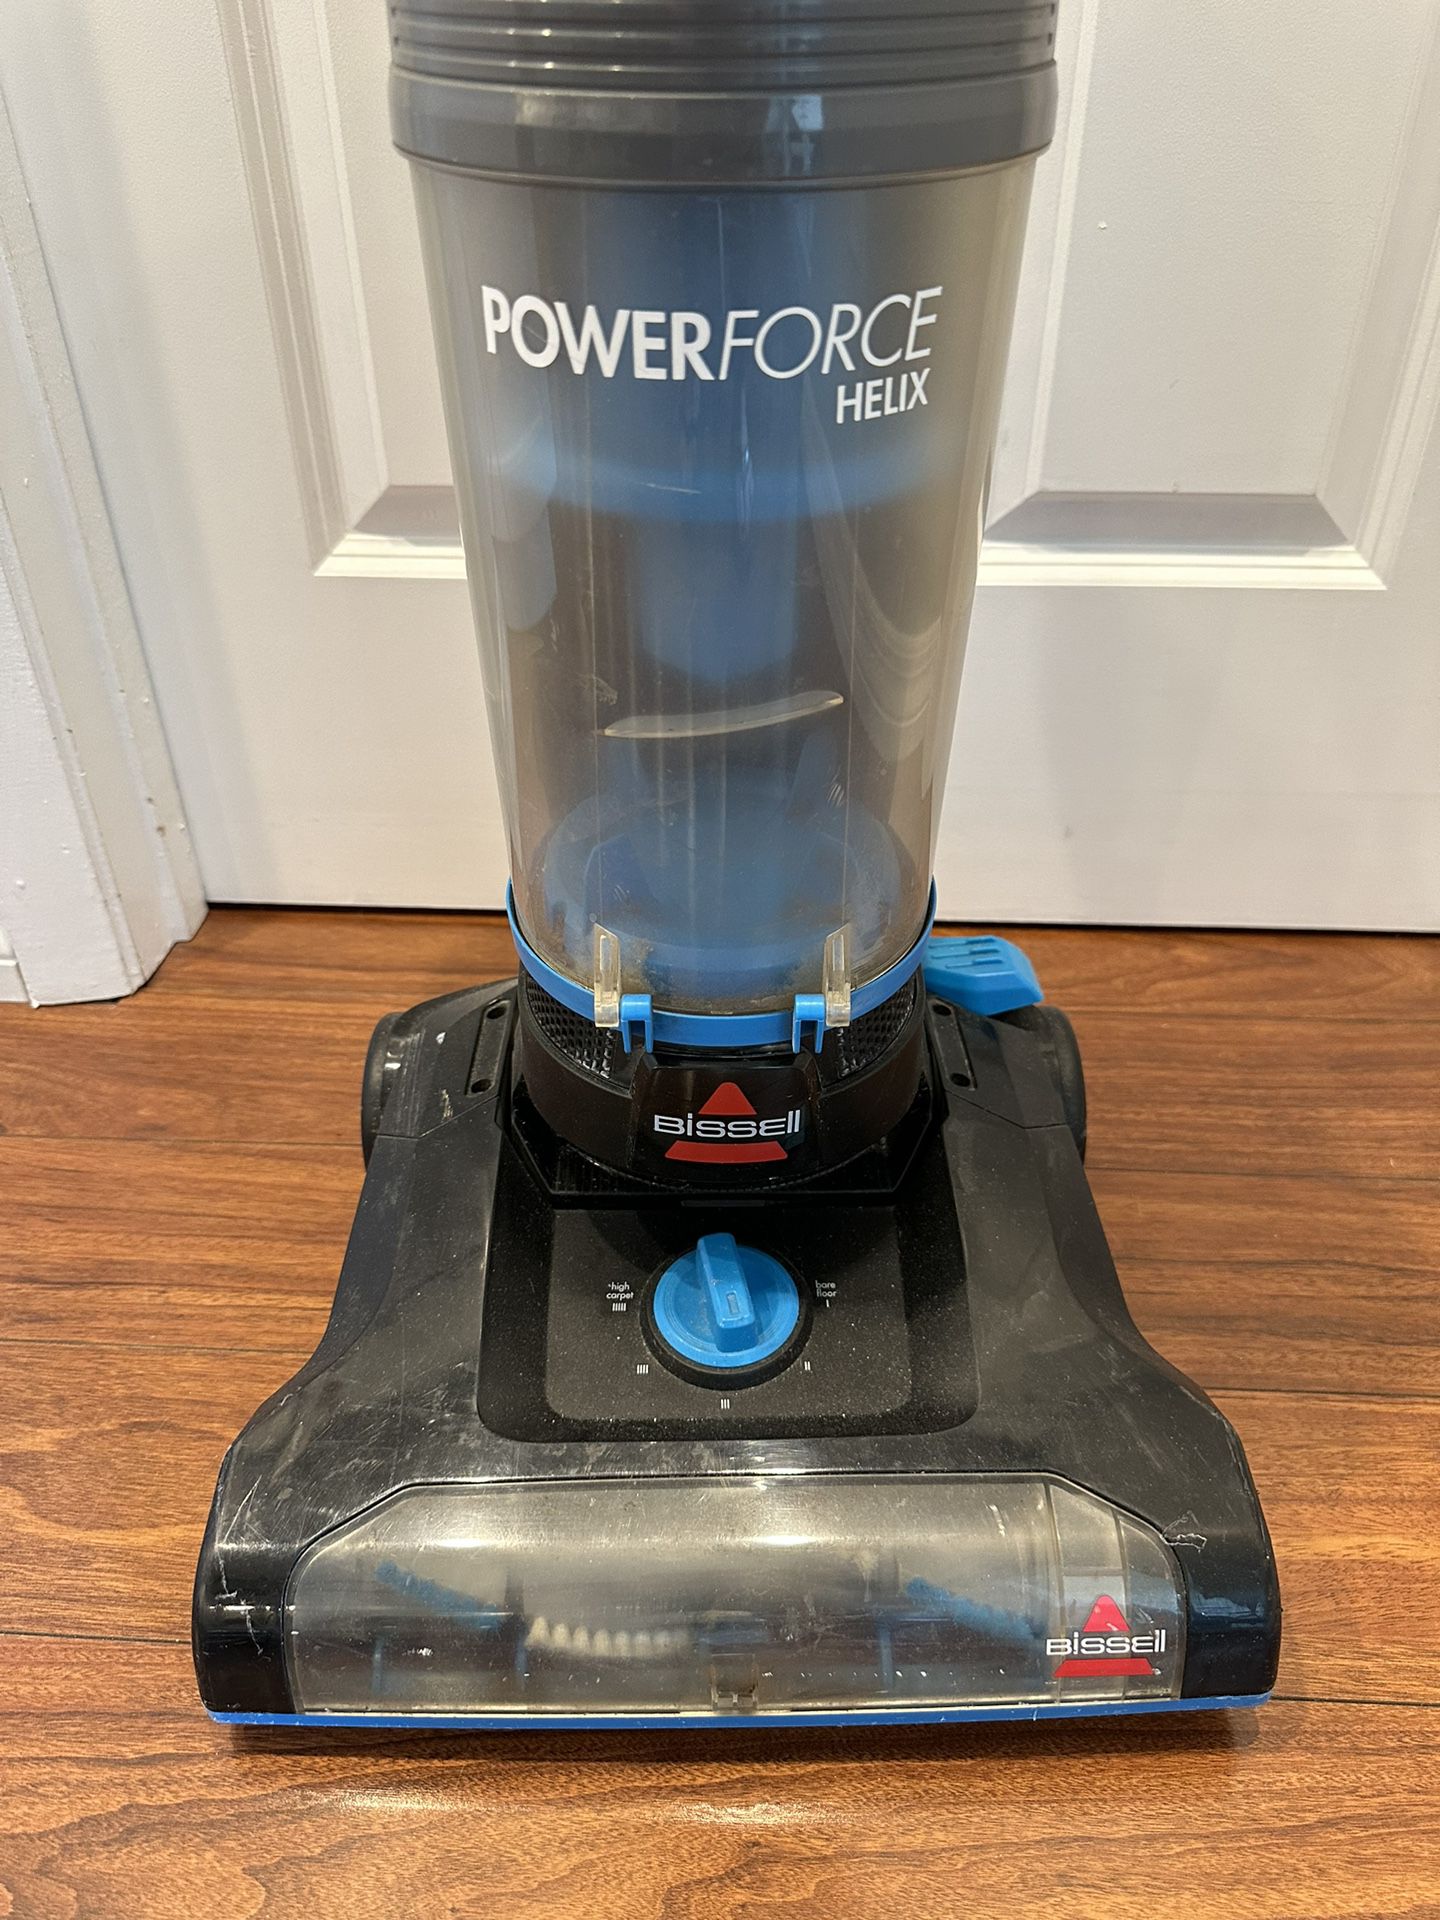 Bissell PowerForce Helix Upright Vacuum Cleaner 